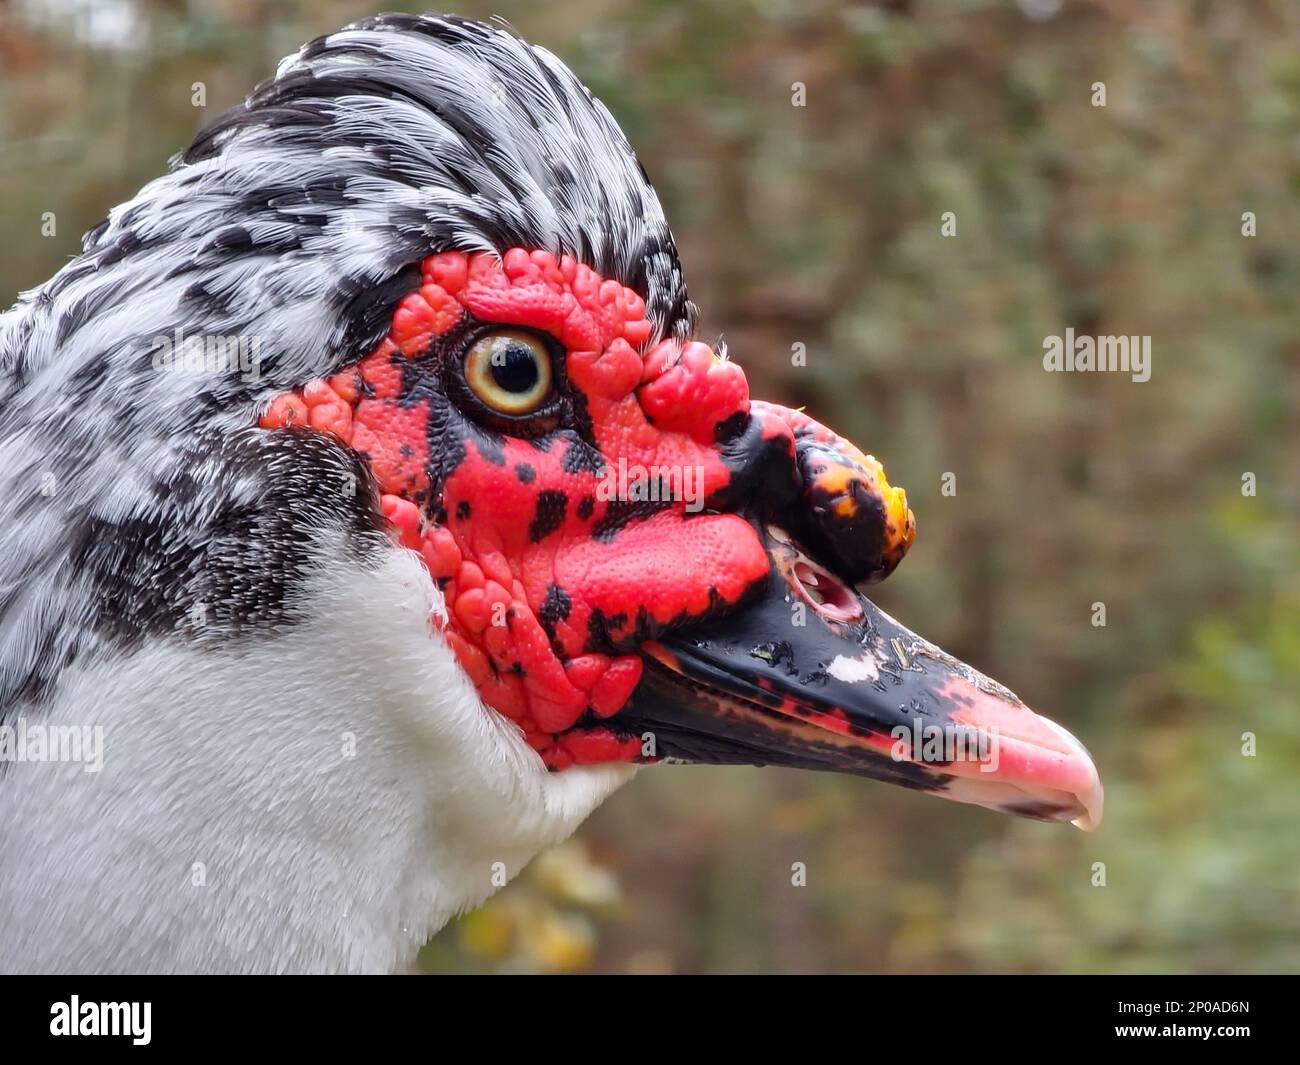 Close up of a white and black Muscovy duck with a red face. Photographed in profile with a shallow depth of field. Stock Photo